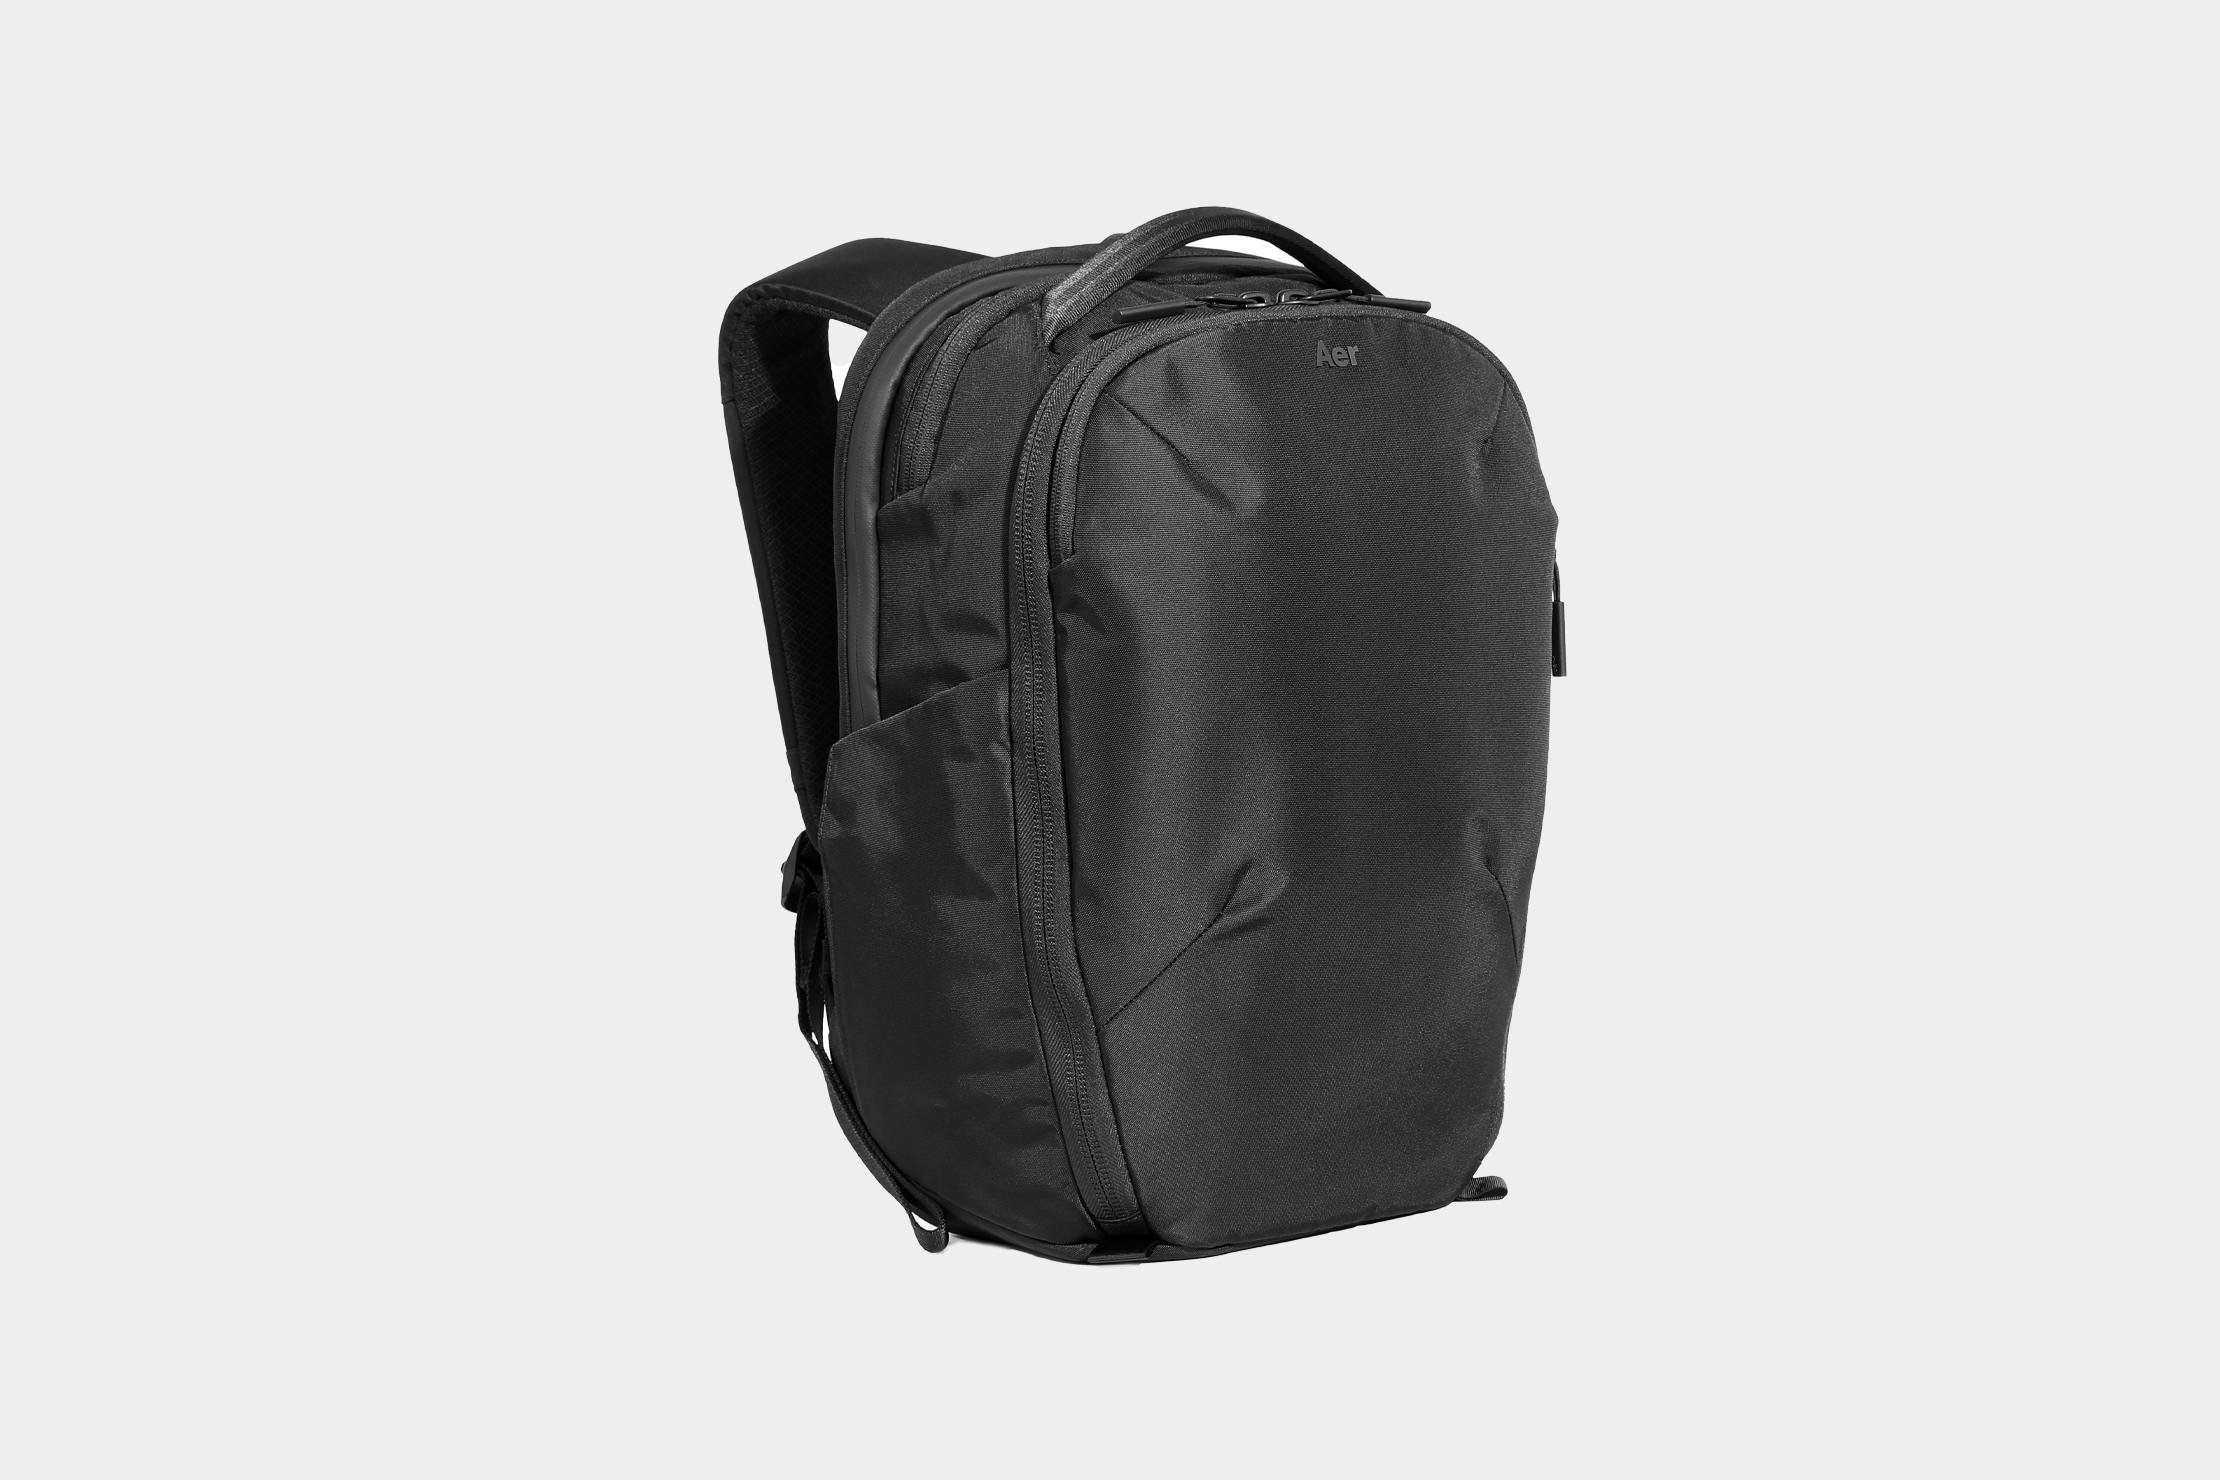 Aer Pro Pack 20L Review | Pack Hacker